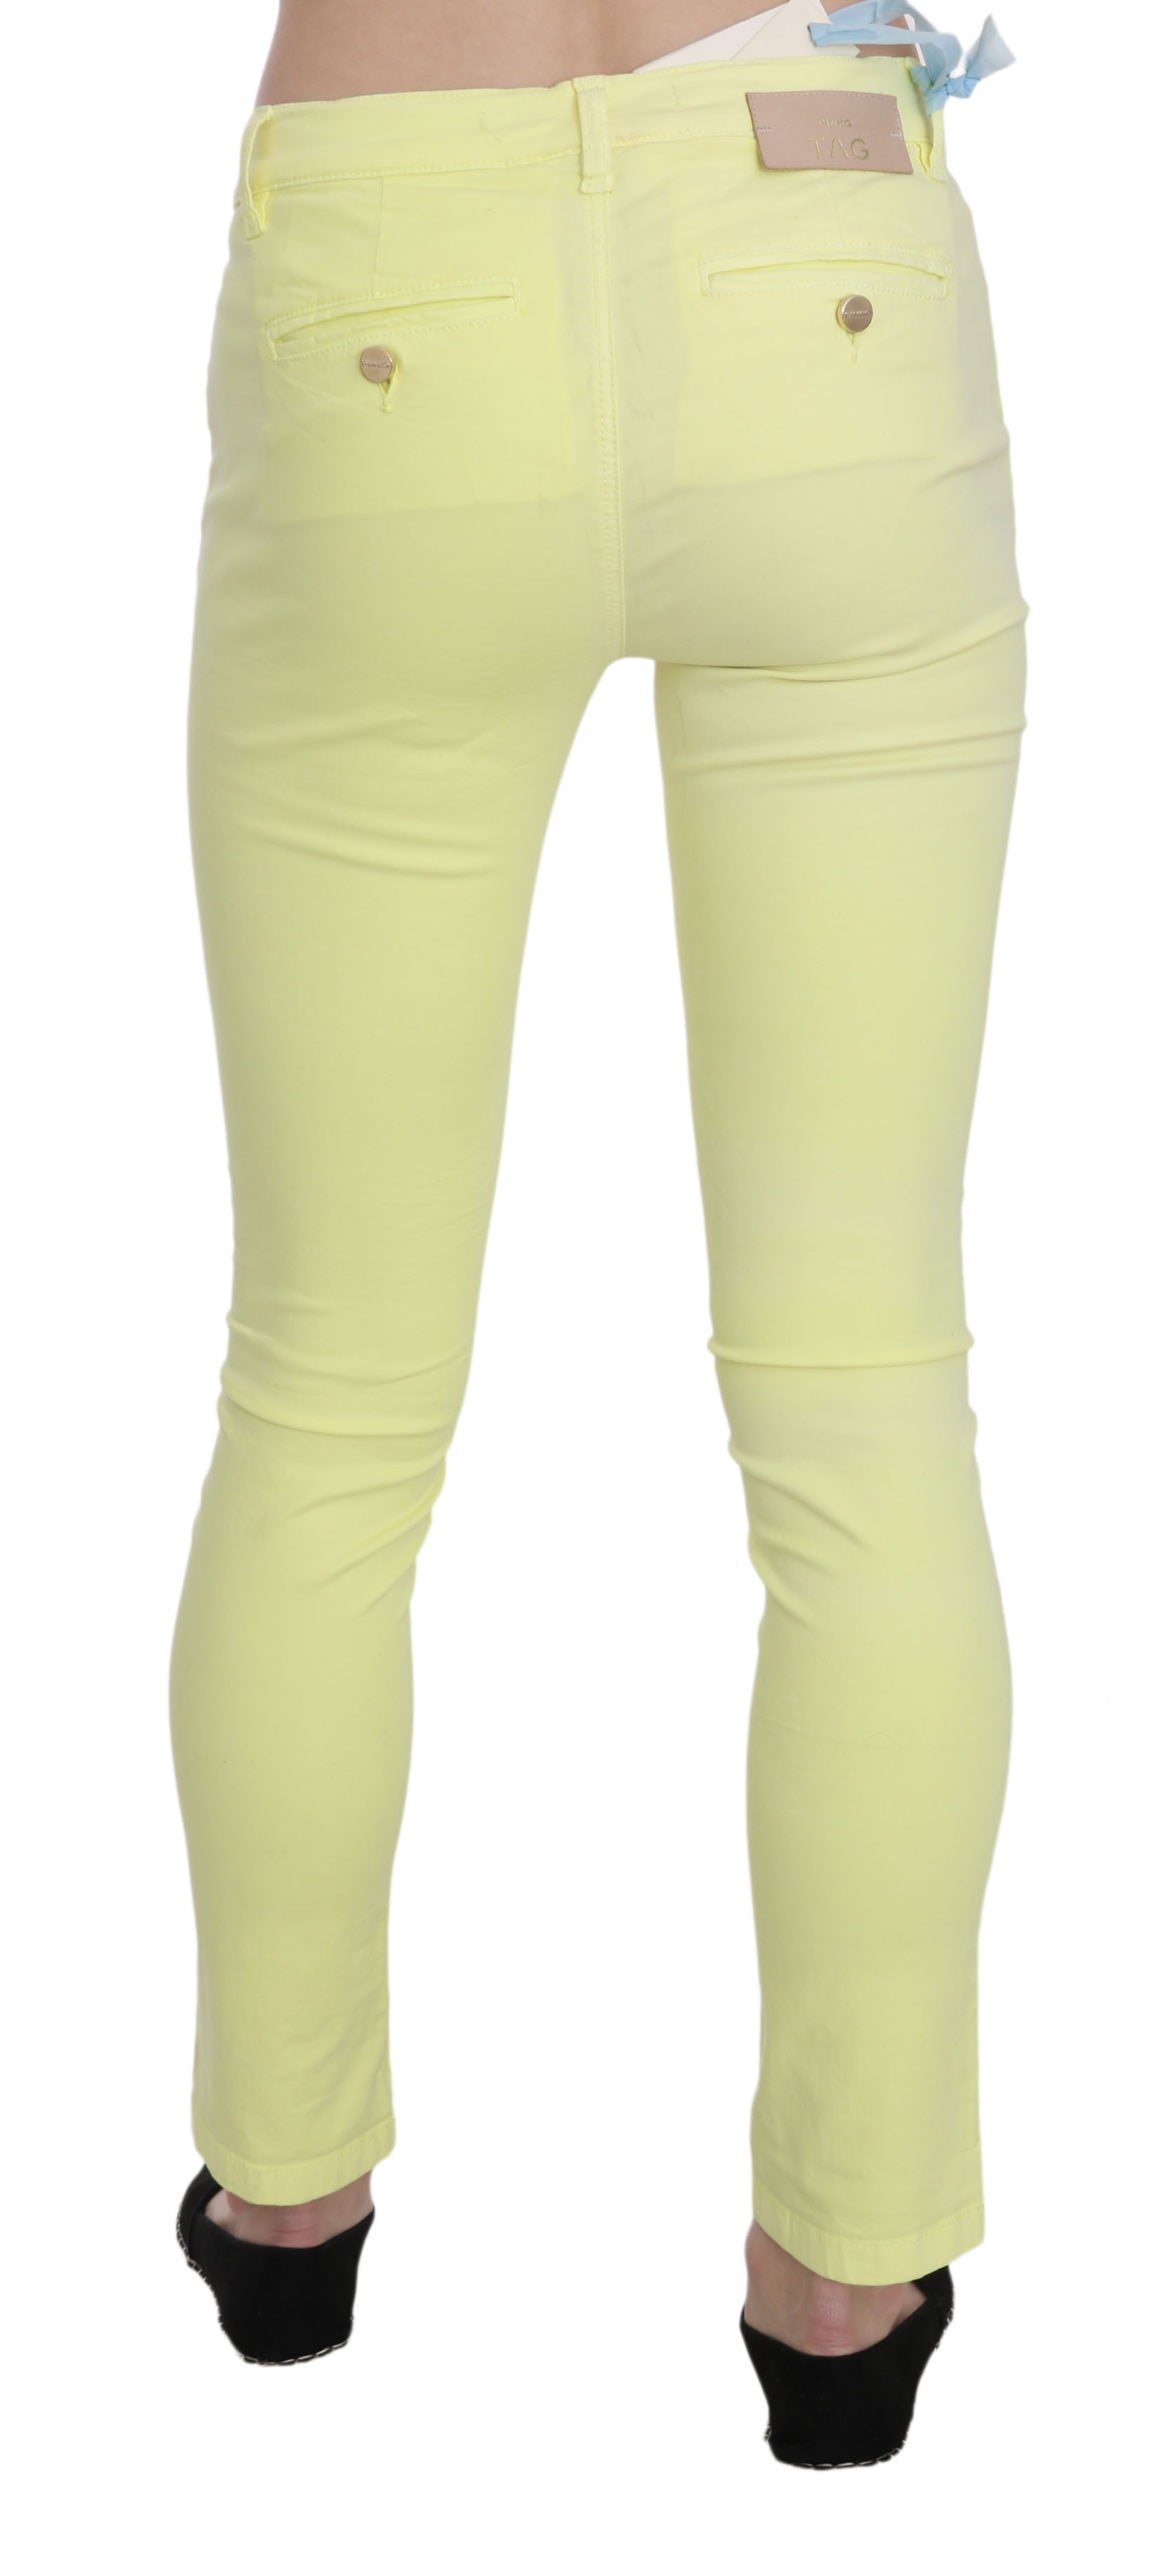 Chic Yellow Low Waist Skinny Casual Trousers